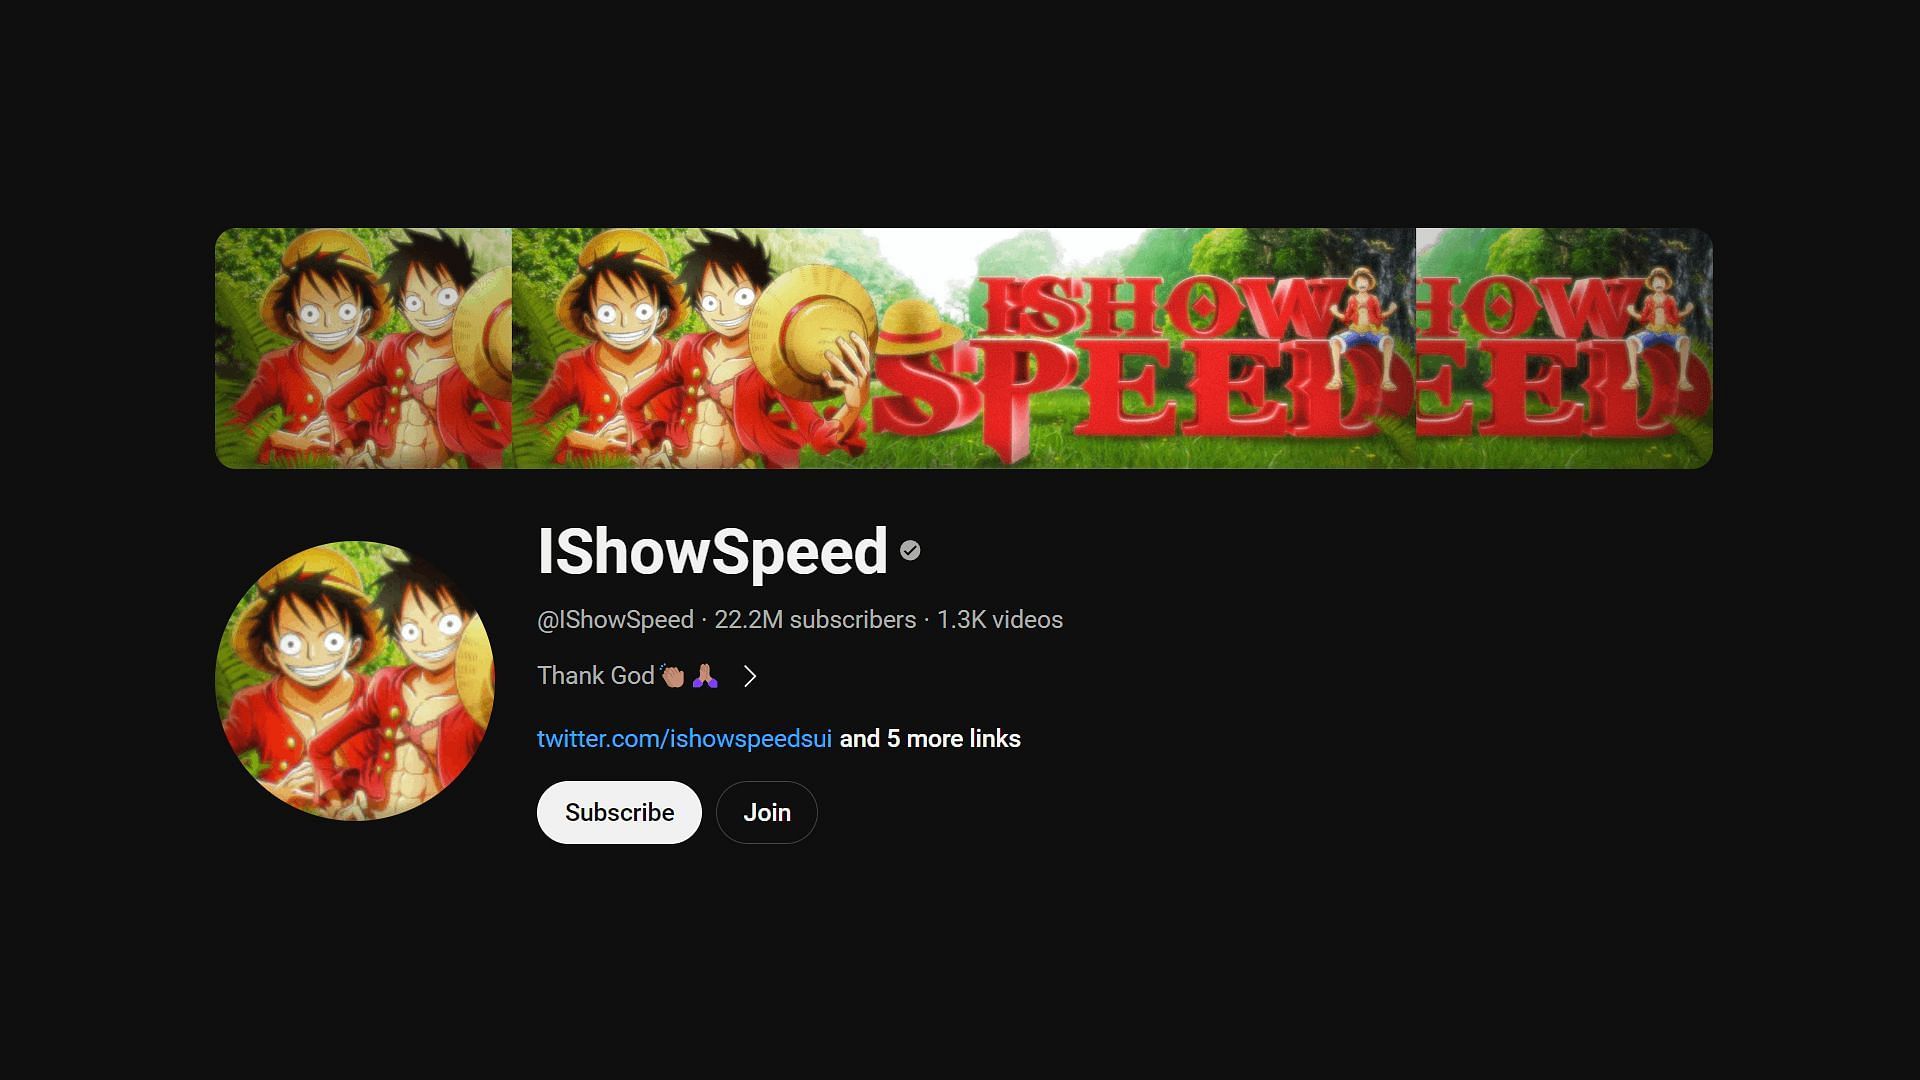 IShowSpeed&#039;s official YouTube channel featuring the anime. (Image via IShowSpeed/YouTube)